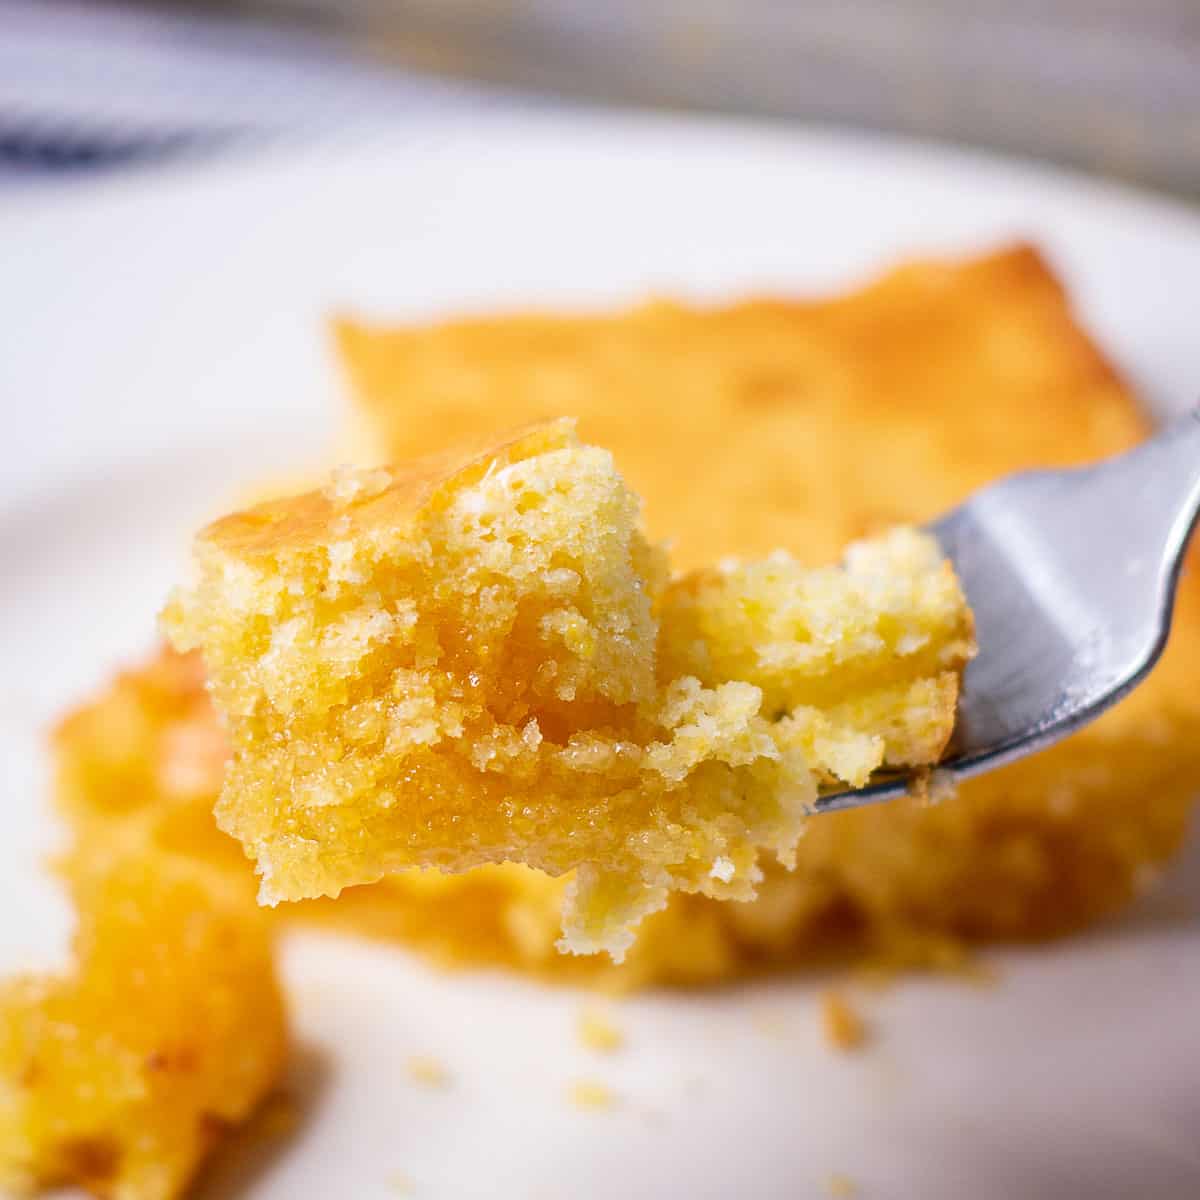 Bite shot of Best Jiffy Cornbread Recipe showing the delicious honey butter bottom.